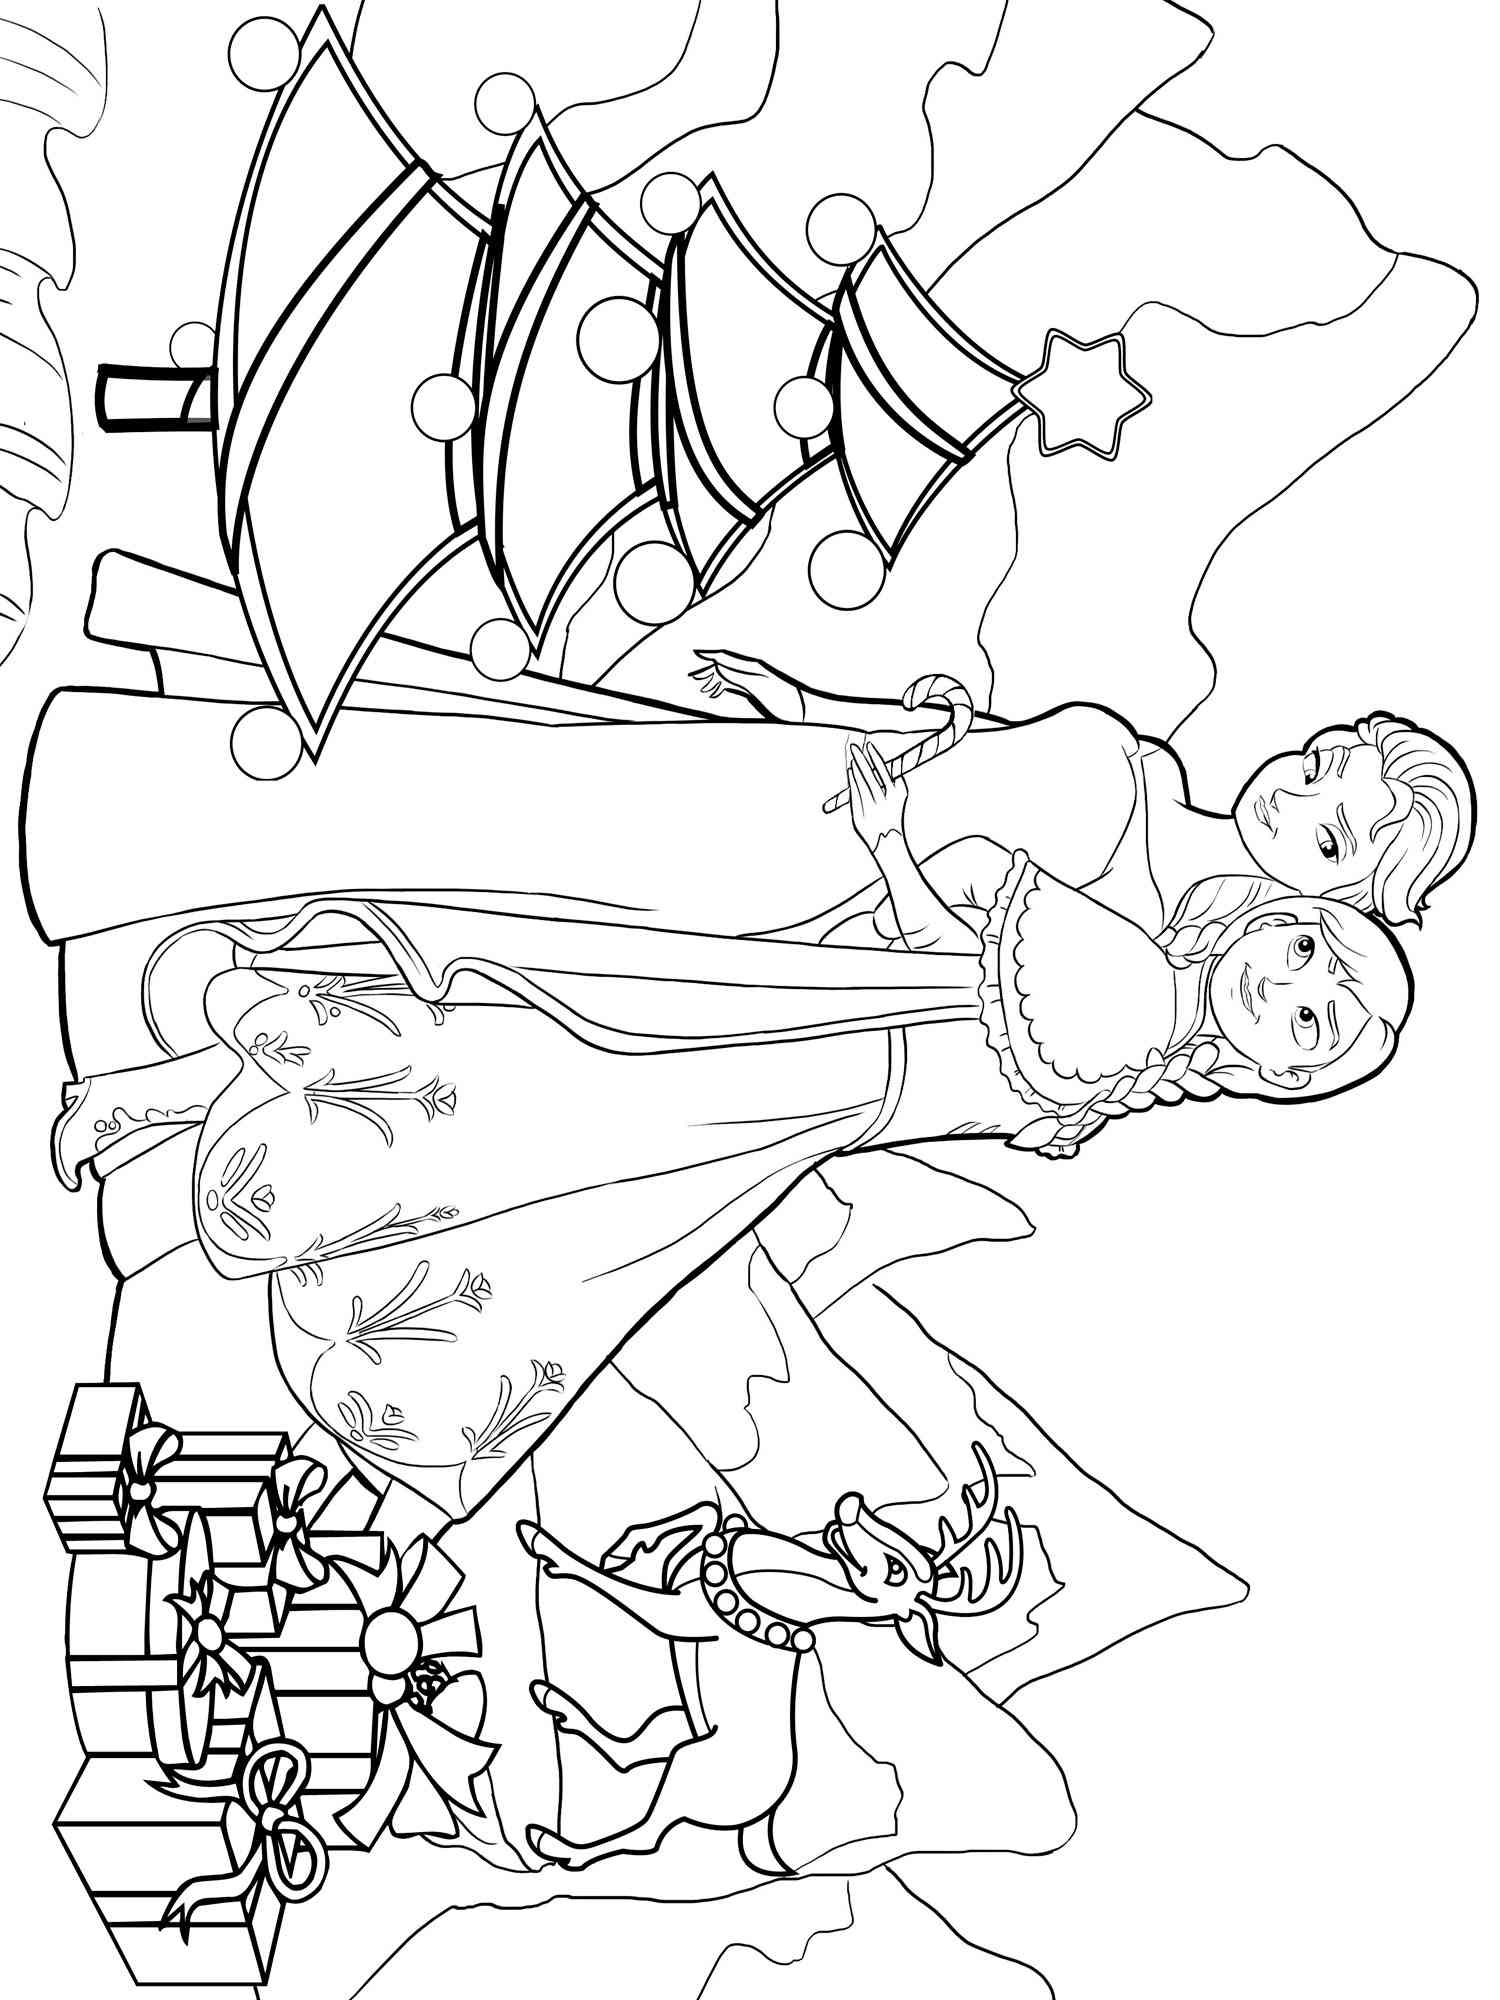 Disney Christmas 15 coloring page